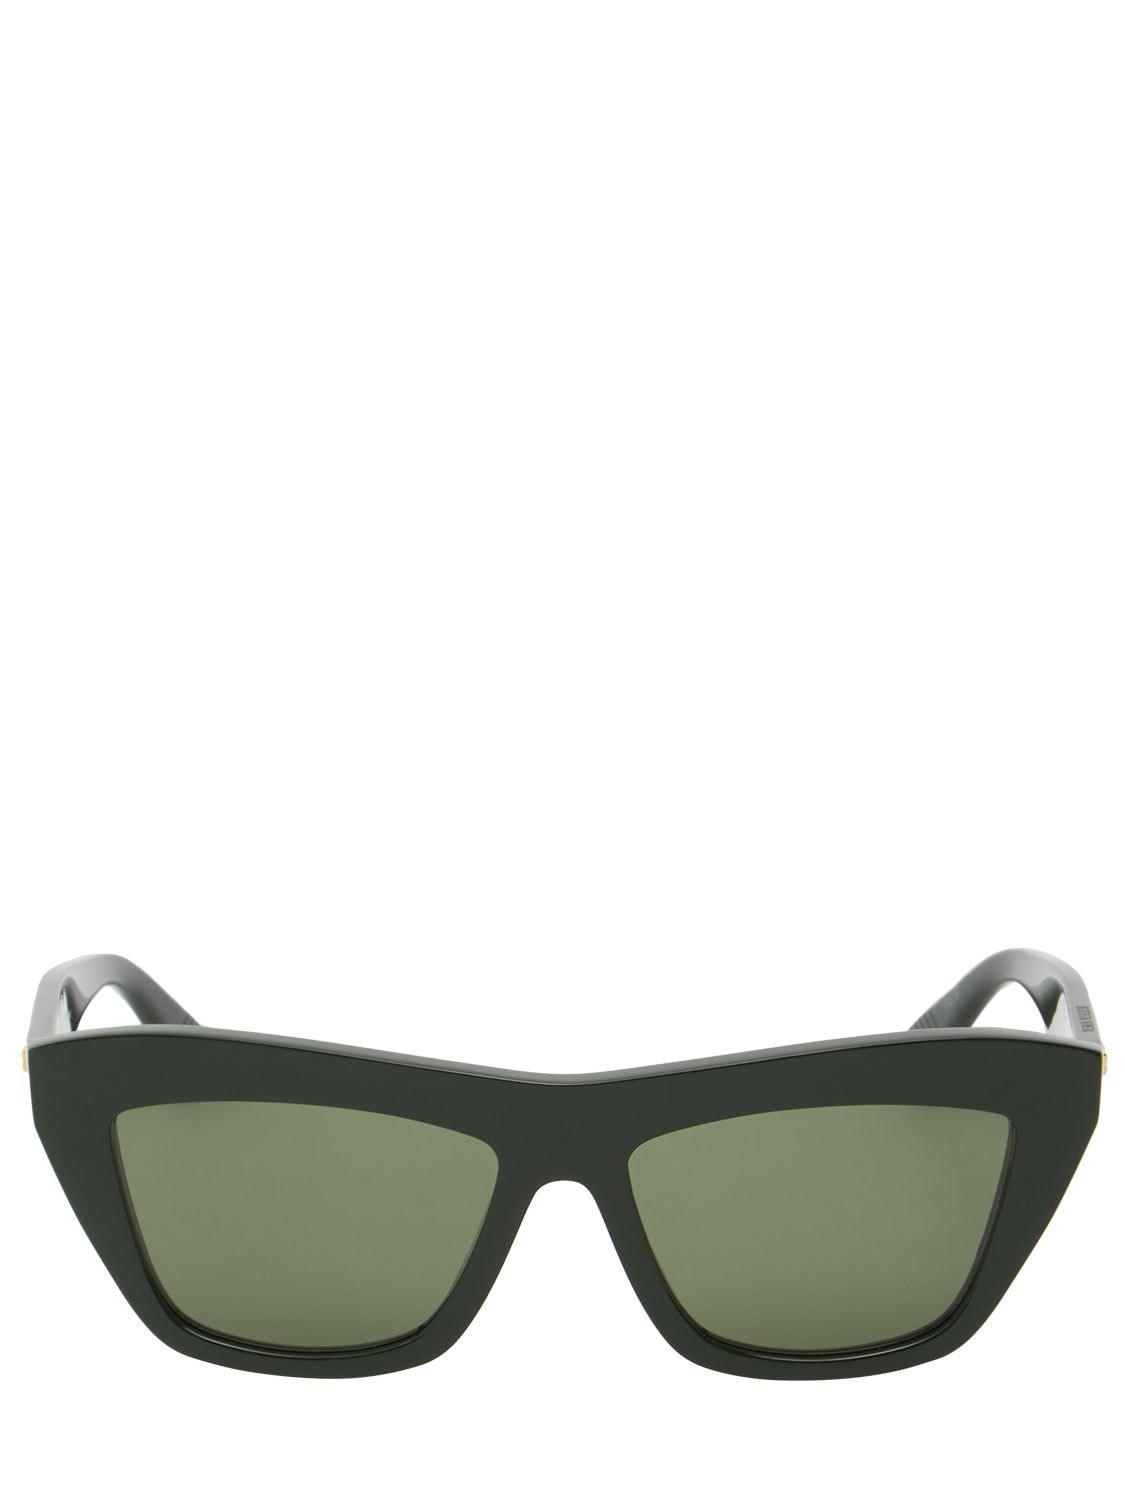 Bv1121s Recycled Acetate Sunglasses